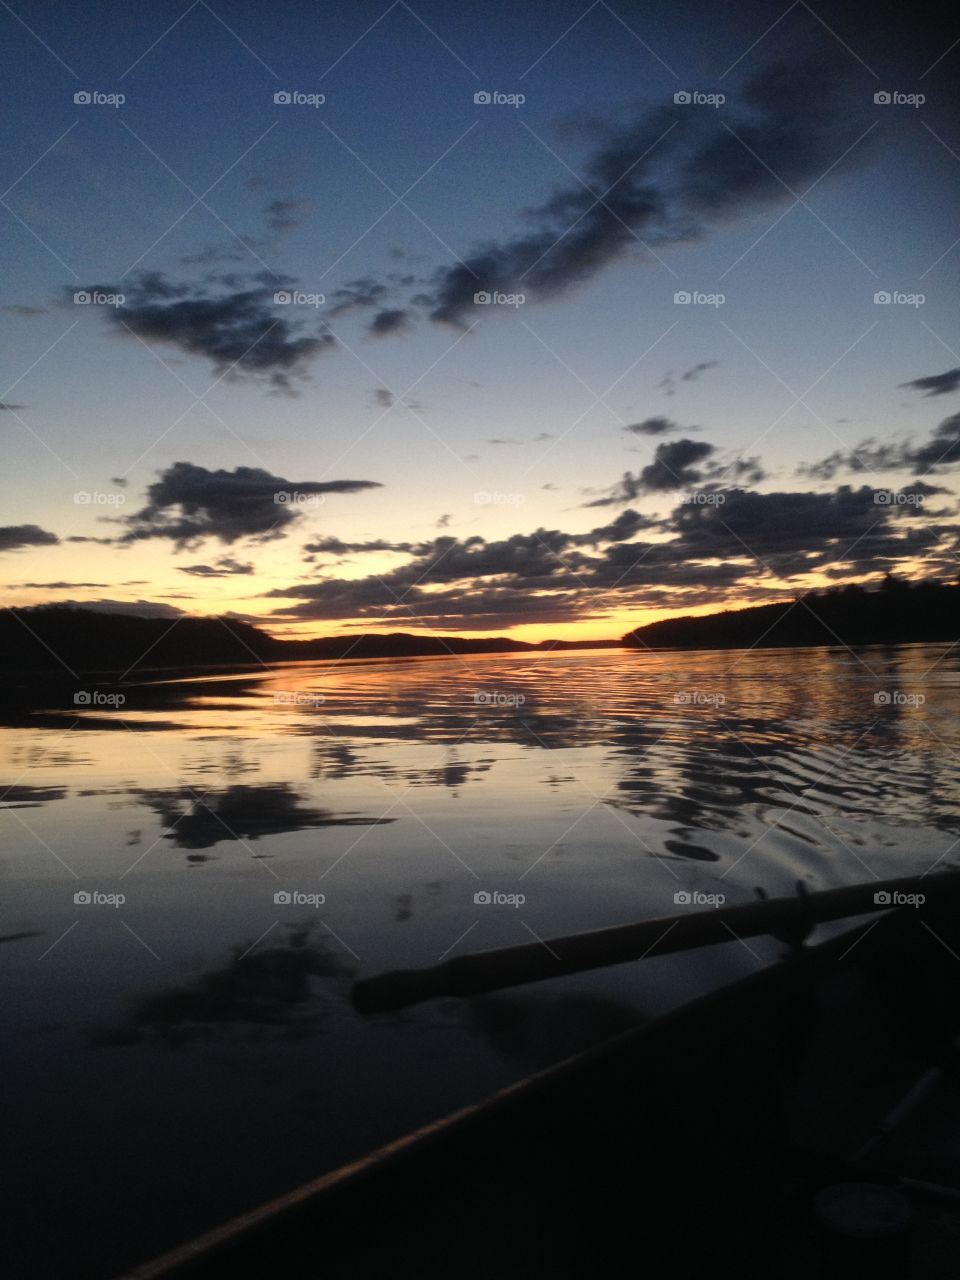 beautiful night in sweden out on a boat fishing.